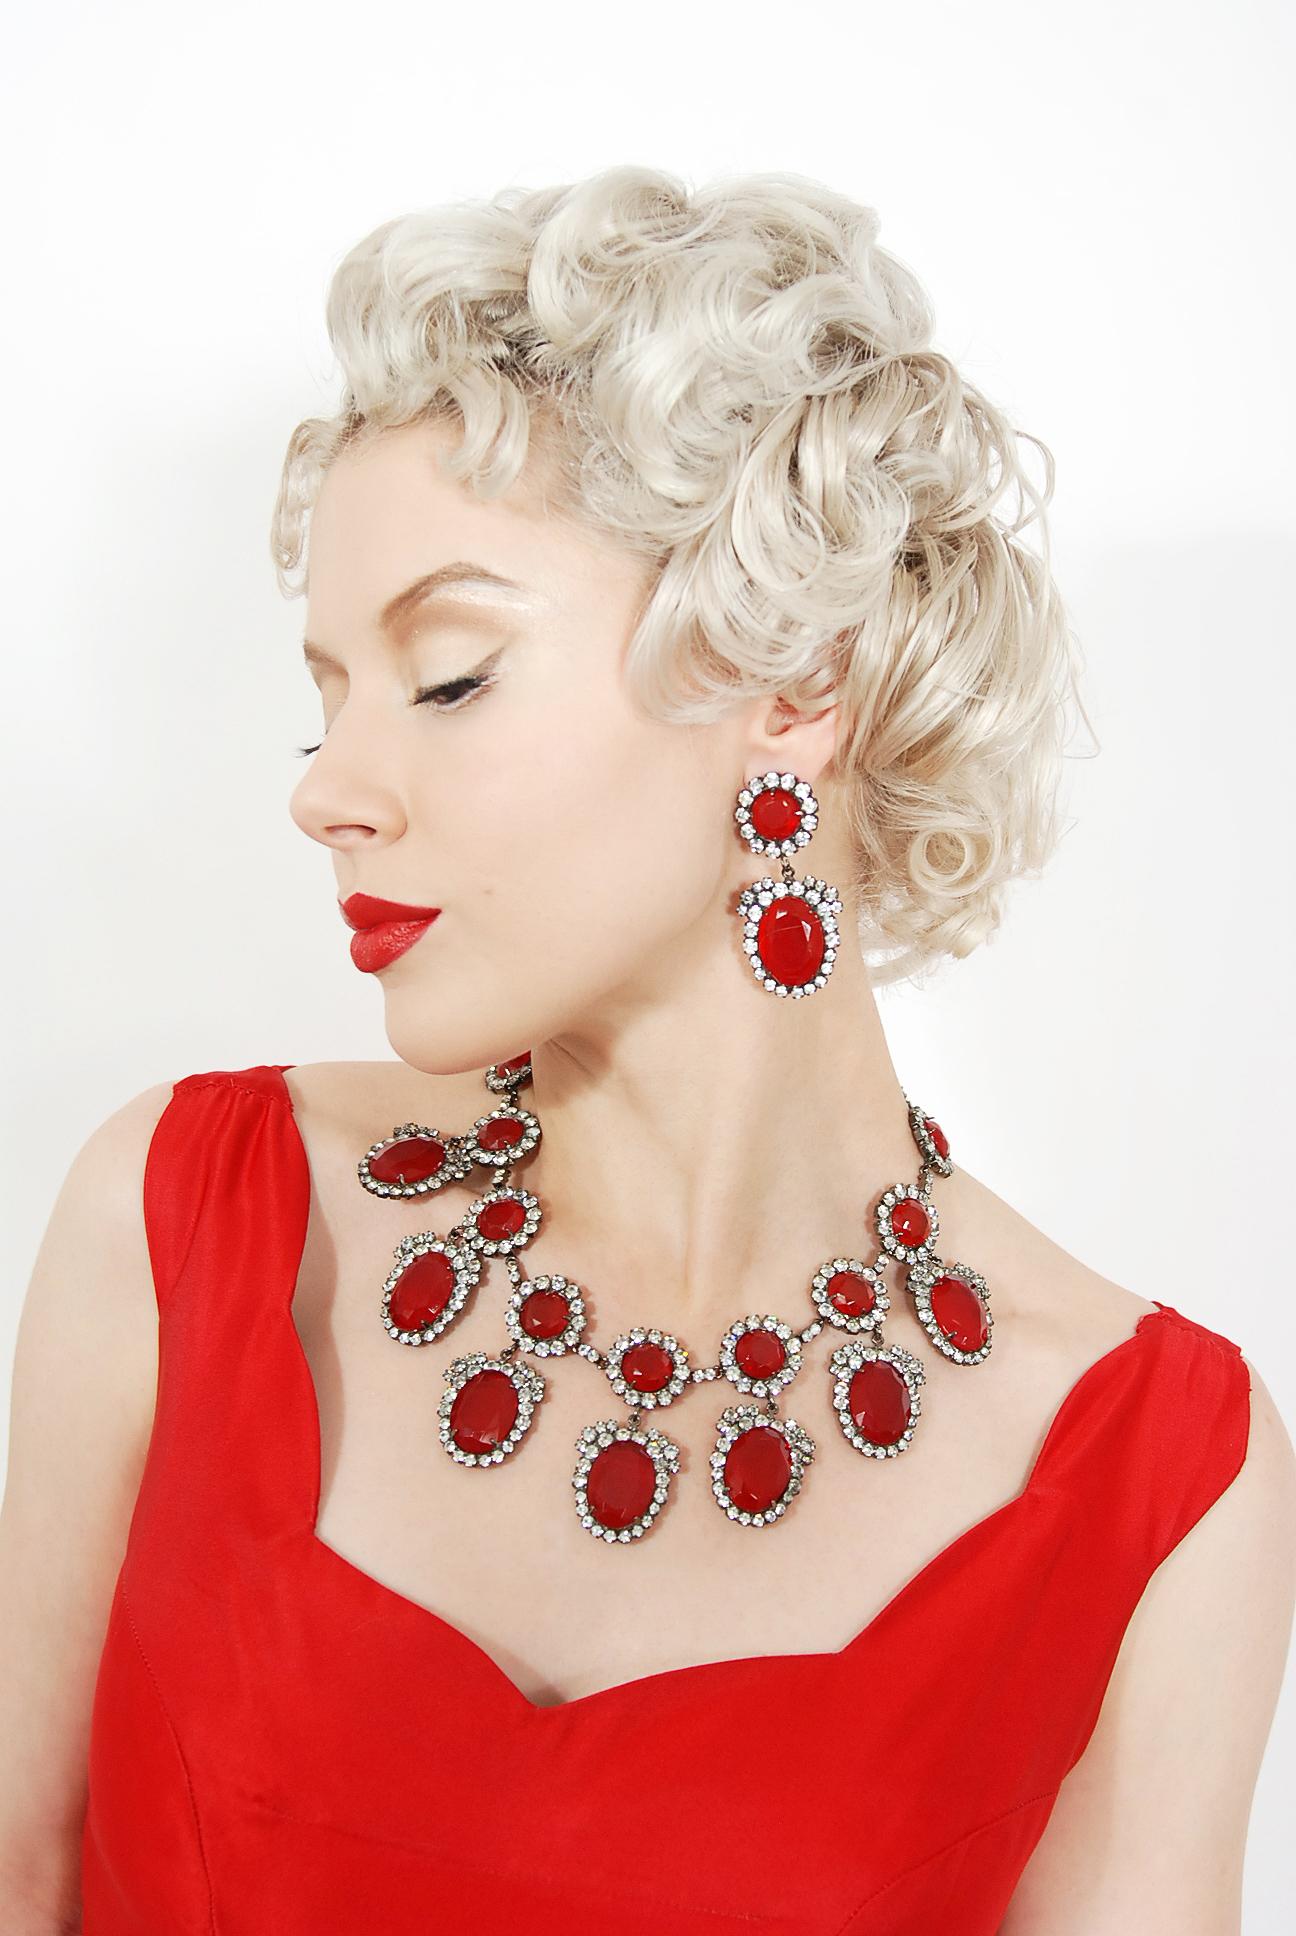 This gorgeous and iconic ruby red necklace with matching drop-earrings was designed by the famous Kenneth Jay Lane. The same version was made for the Duchess of Windsor in 1965 and is shown on page 147 of the 